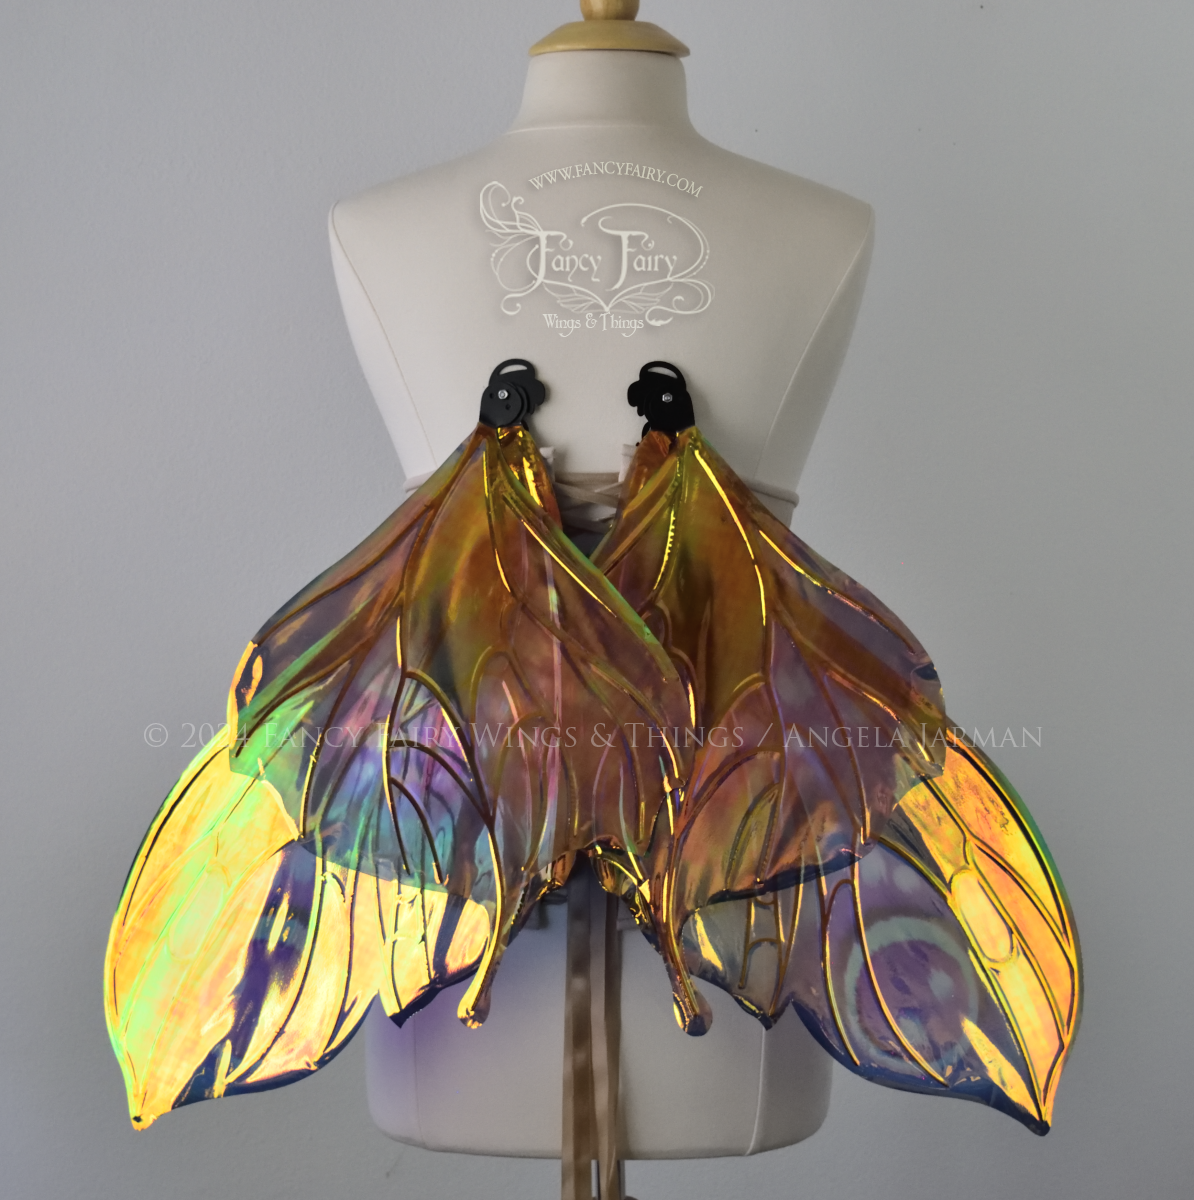 Back view of butterfly shaped iridescent wings in shades of teal with pink and lavender accents with black veins, worn on a dressform in resting position